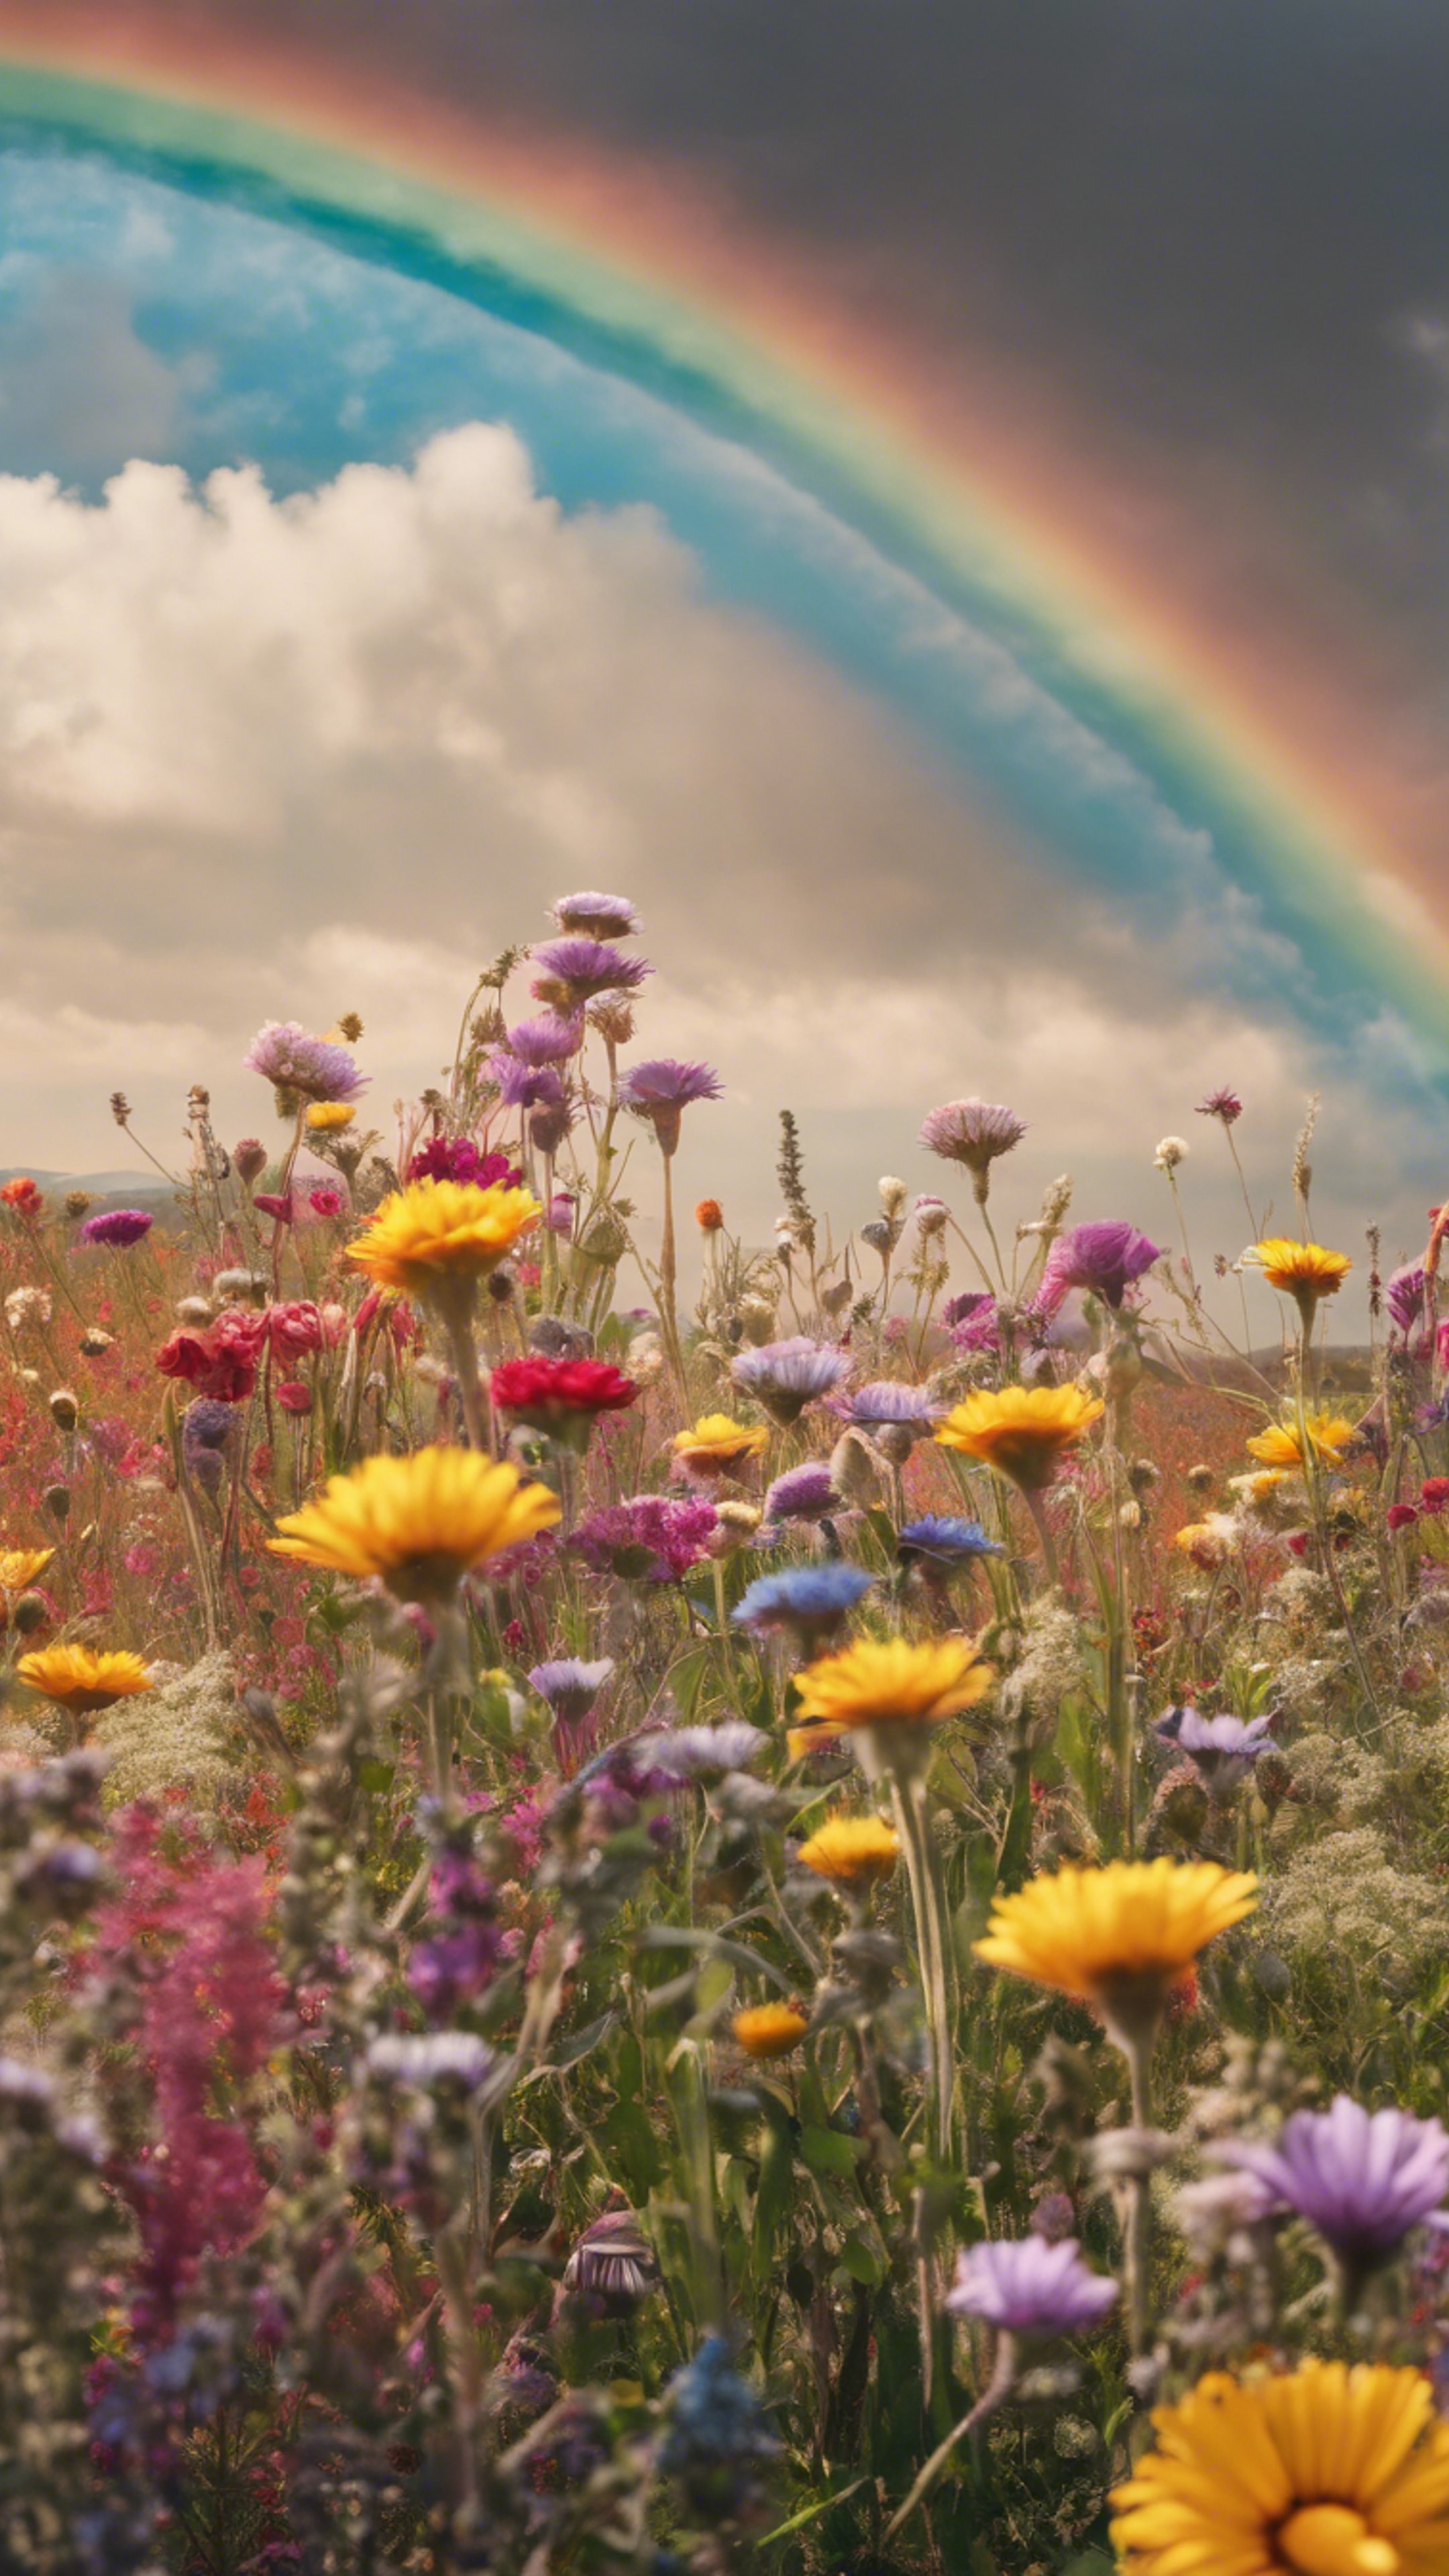 A boho rainbow displayed among a field of wild, colorful flowers. Wallpaper[3dbd29c5dd9e4a928bc8]